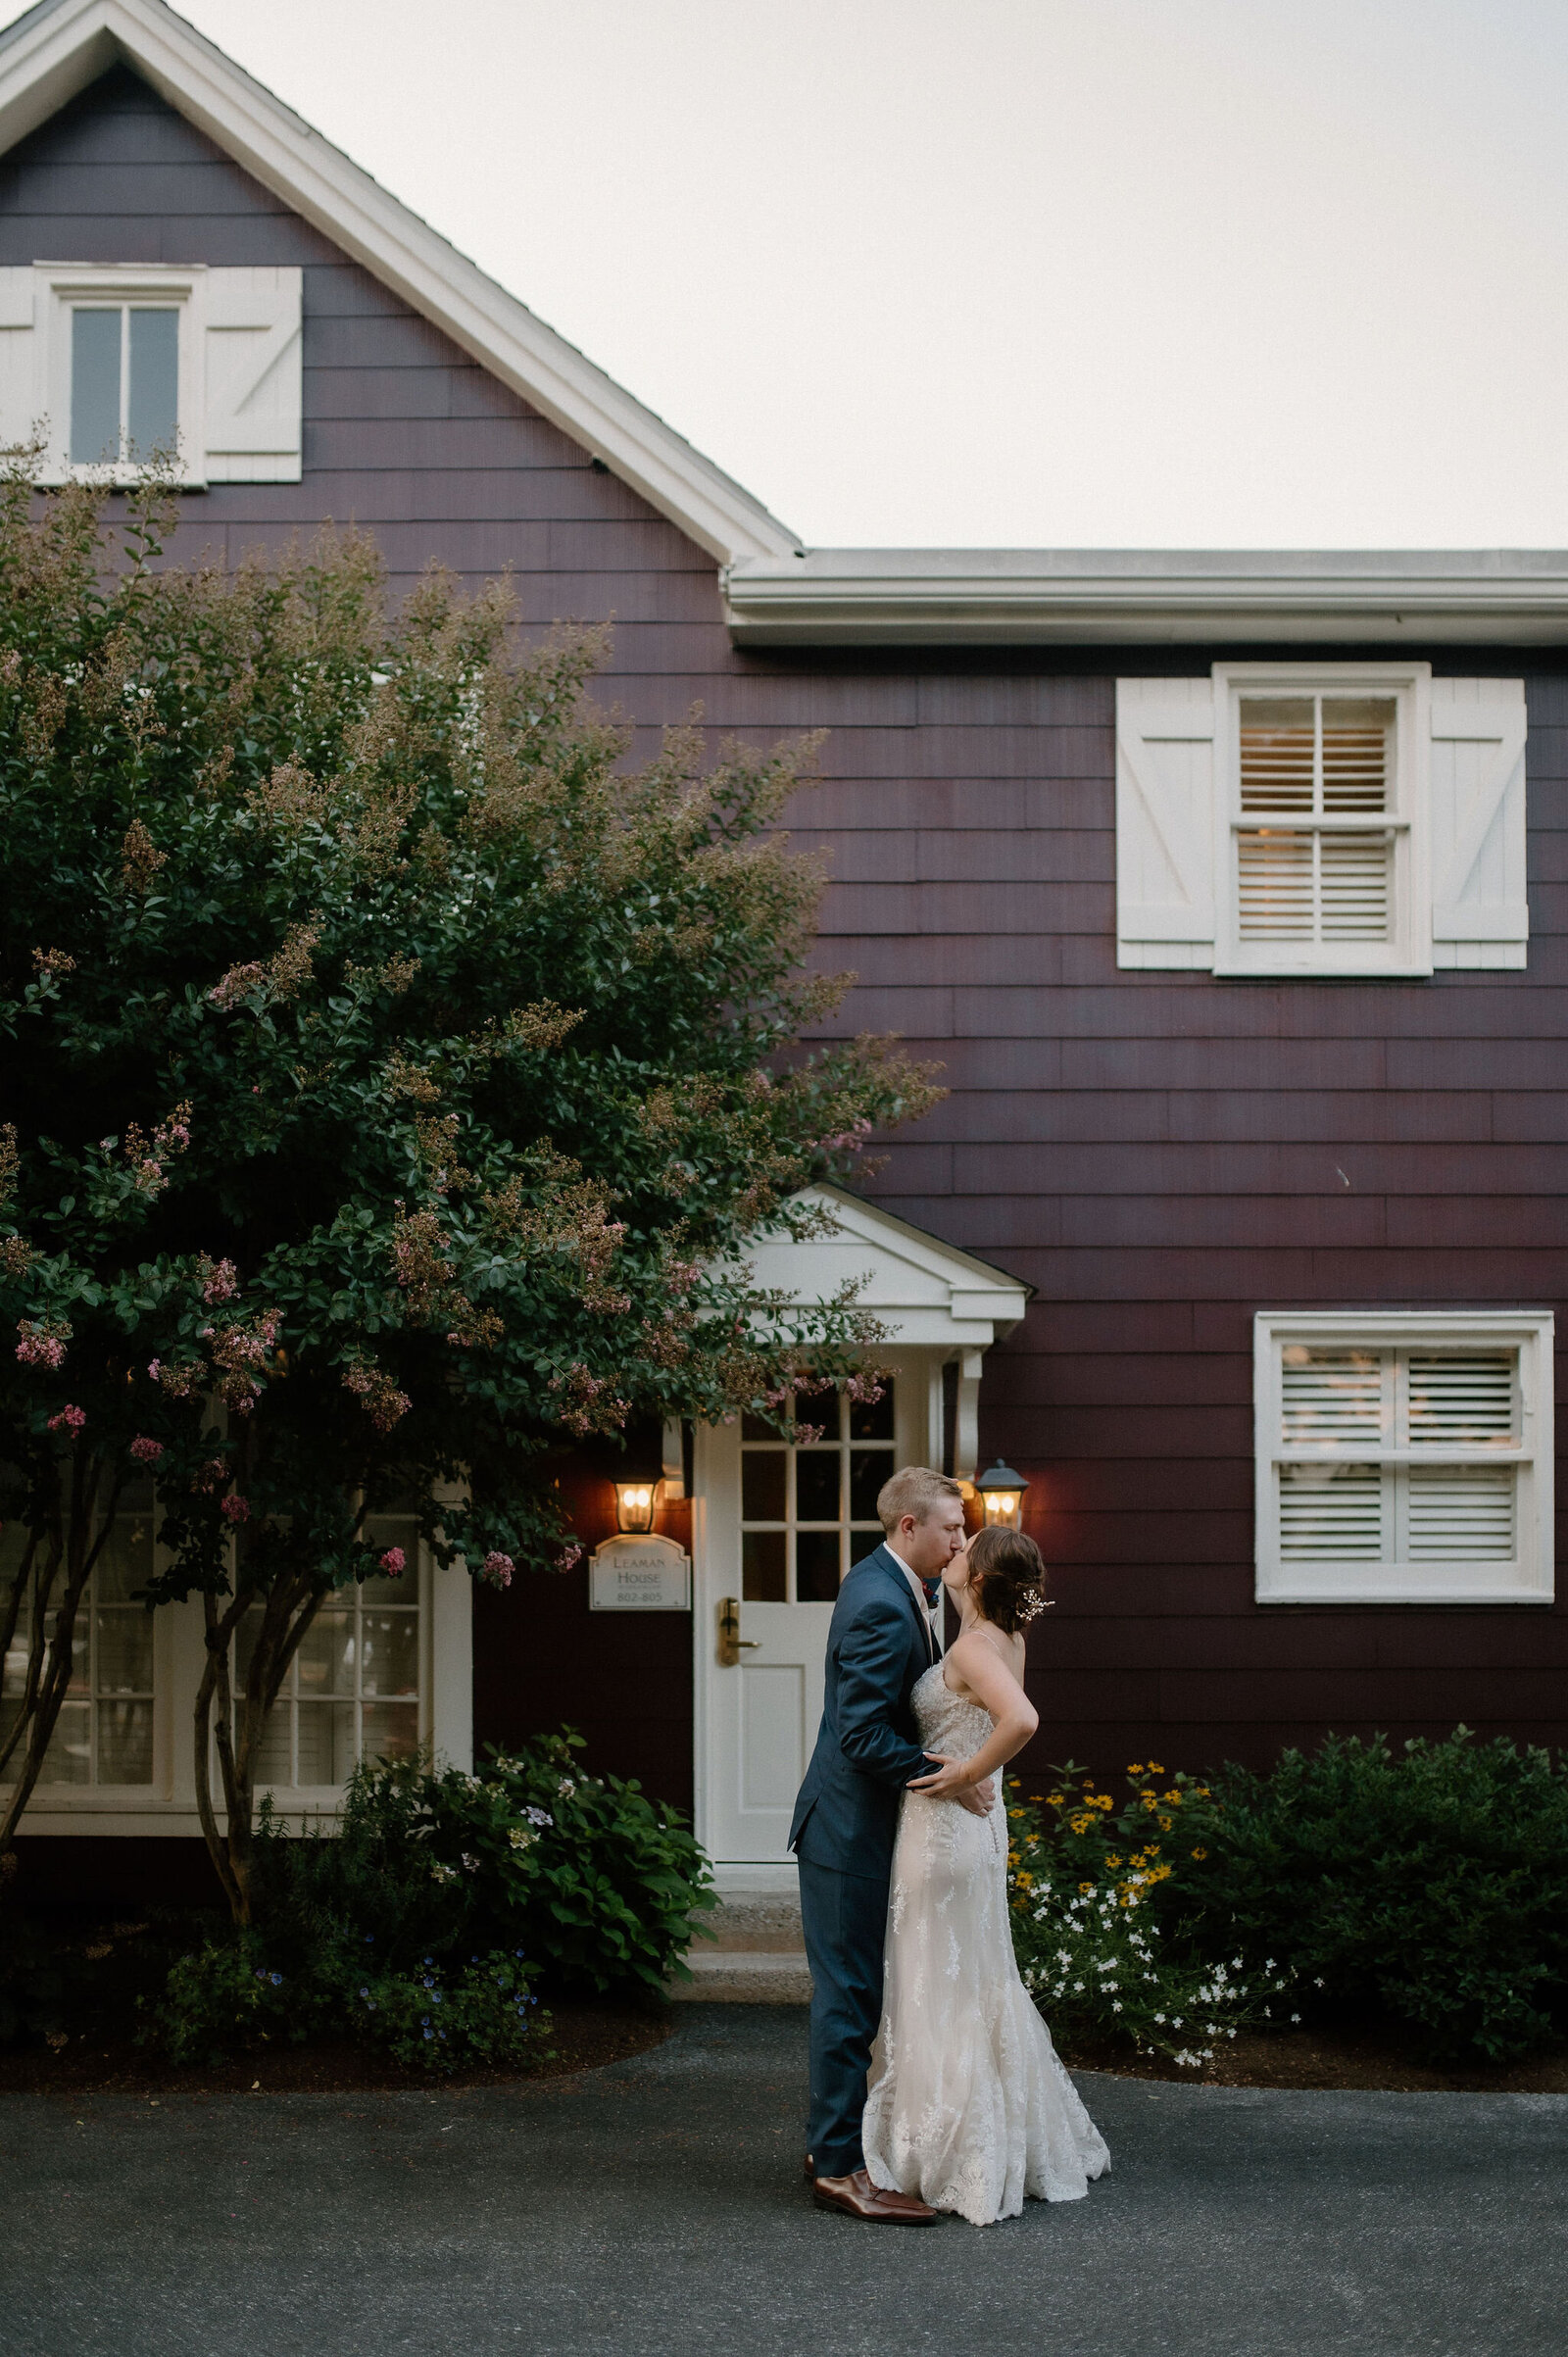 wedding couple kissing in front of maroon house with blooming tree under outdoor porch lights